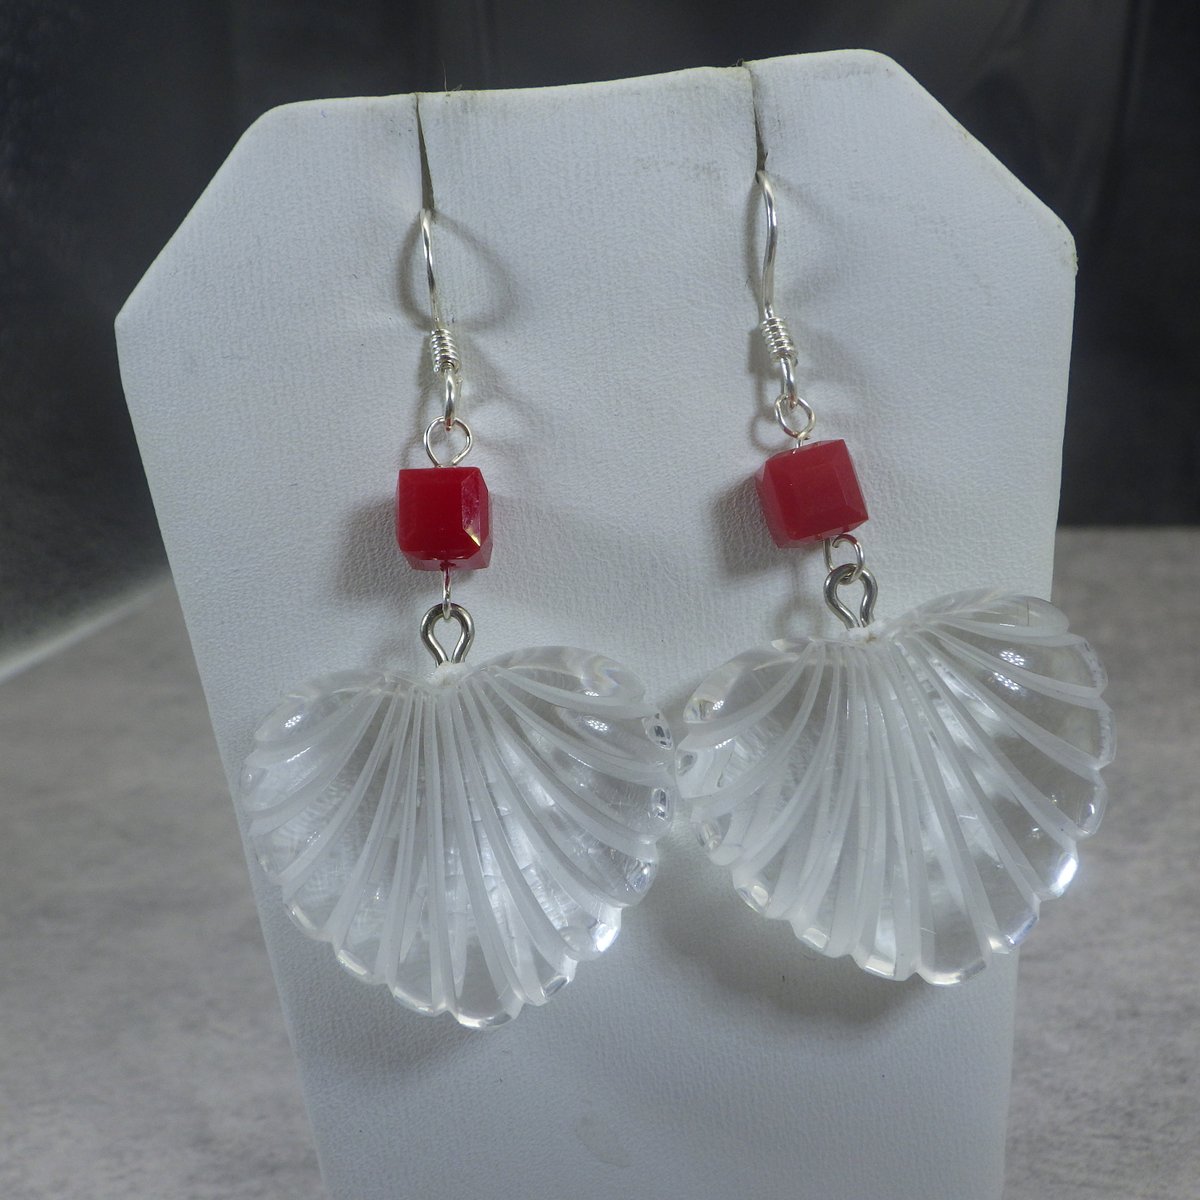 Excited to share the latest addition to my #etsyshop: #CarvedLucite #HeartEarrings For #PiercedEars, Sterling Silver Wires, Vintage Drops, Gift For Her, Light Weight Fun To Wear #RetroEarrings etsy.me/3olSxdU #VintageLoveByDiana